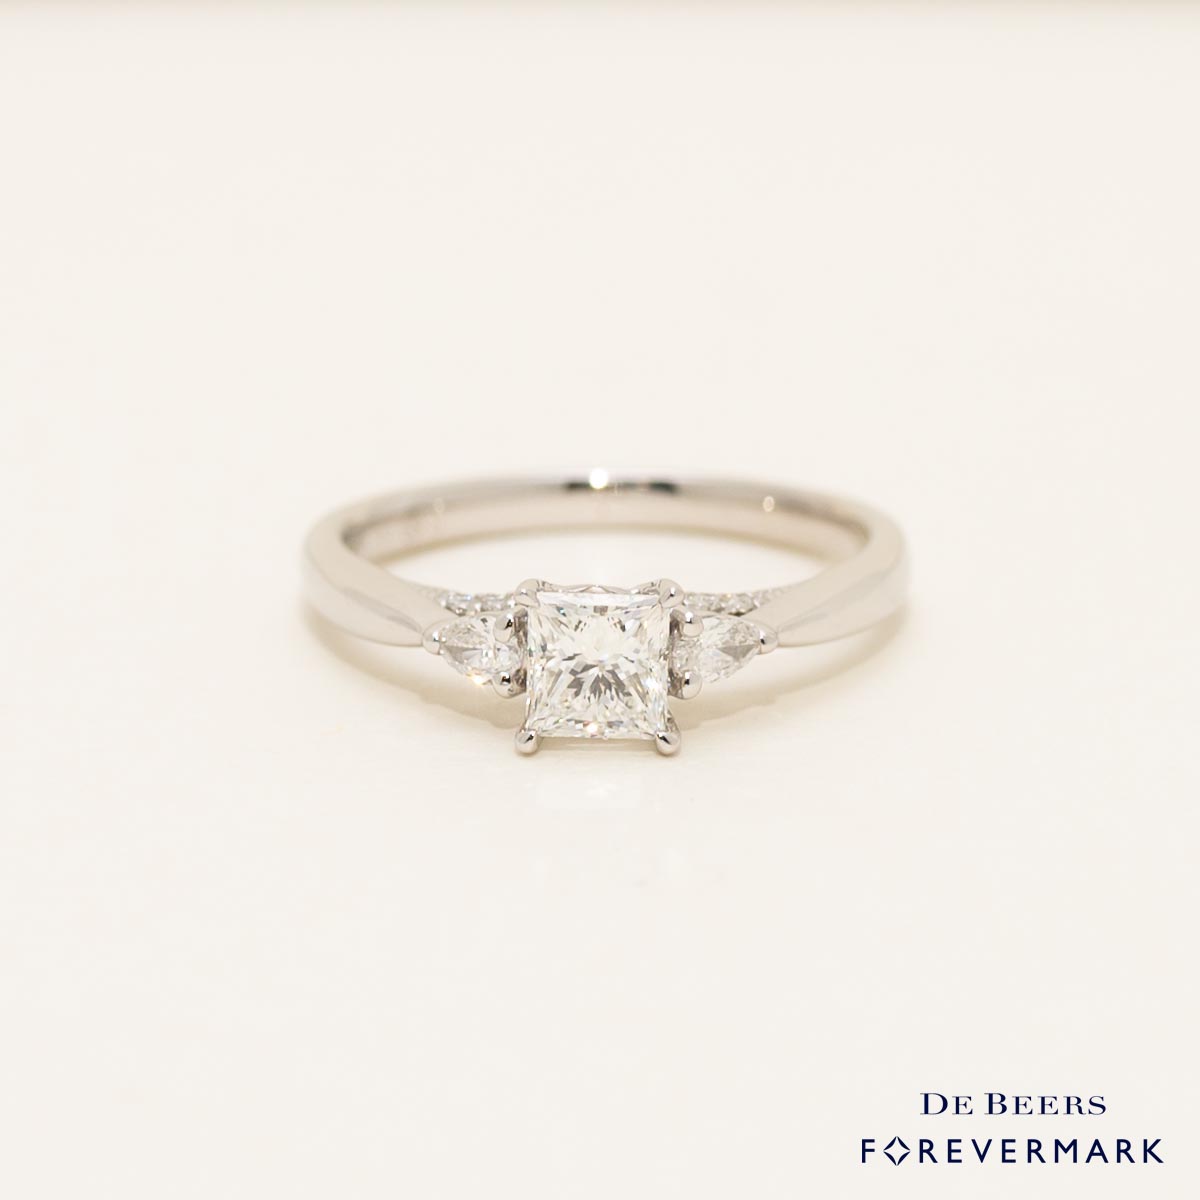 De Beers Forevermark Princess Cut Diamond Three Stone Engagement Ring in 14kt White Gold (3/4ct tw)